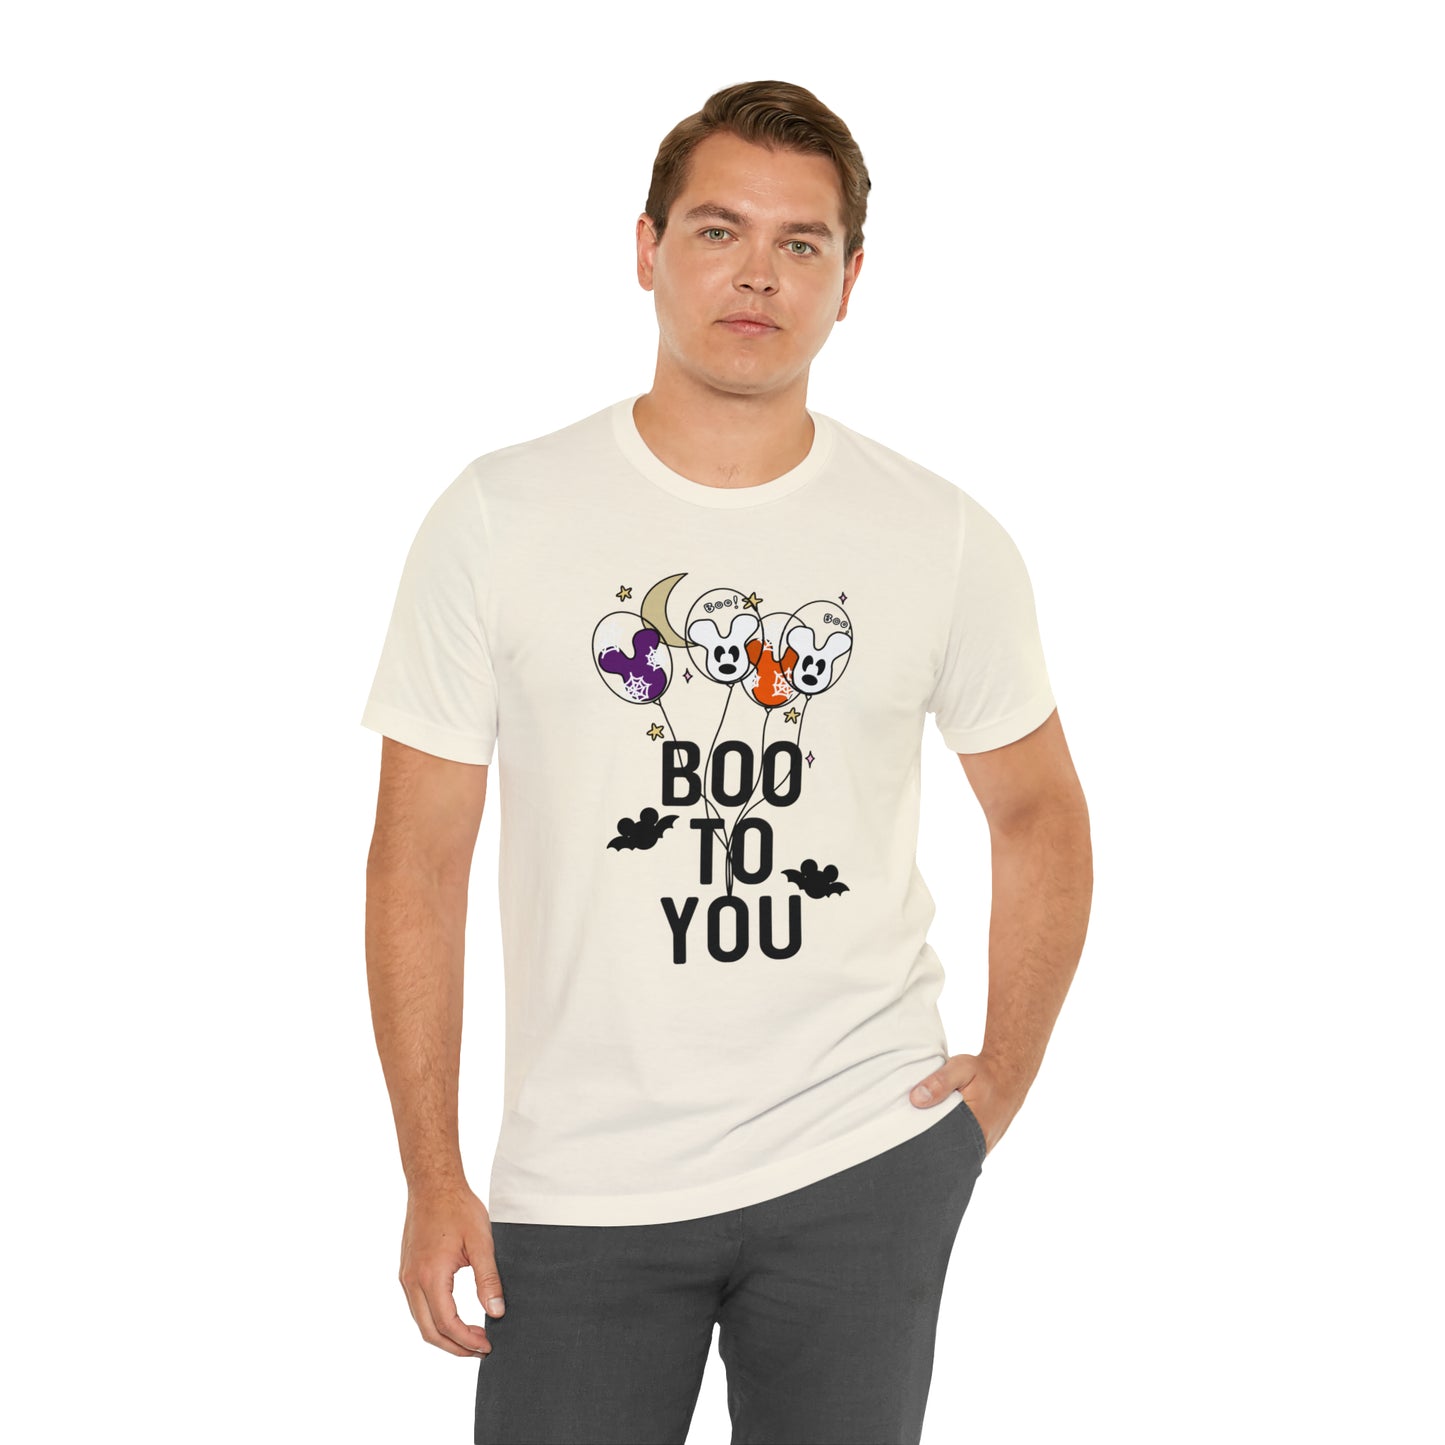 Adult Boo to you Tee - Bella + Canvas